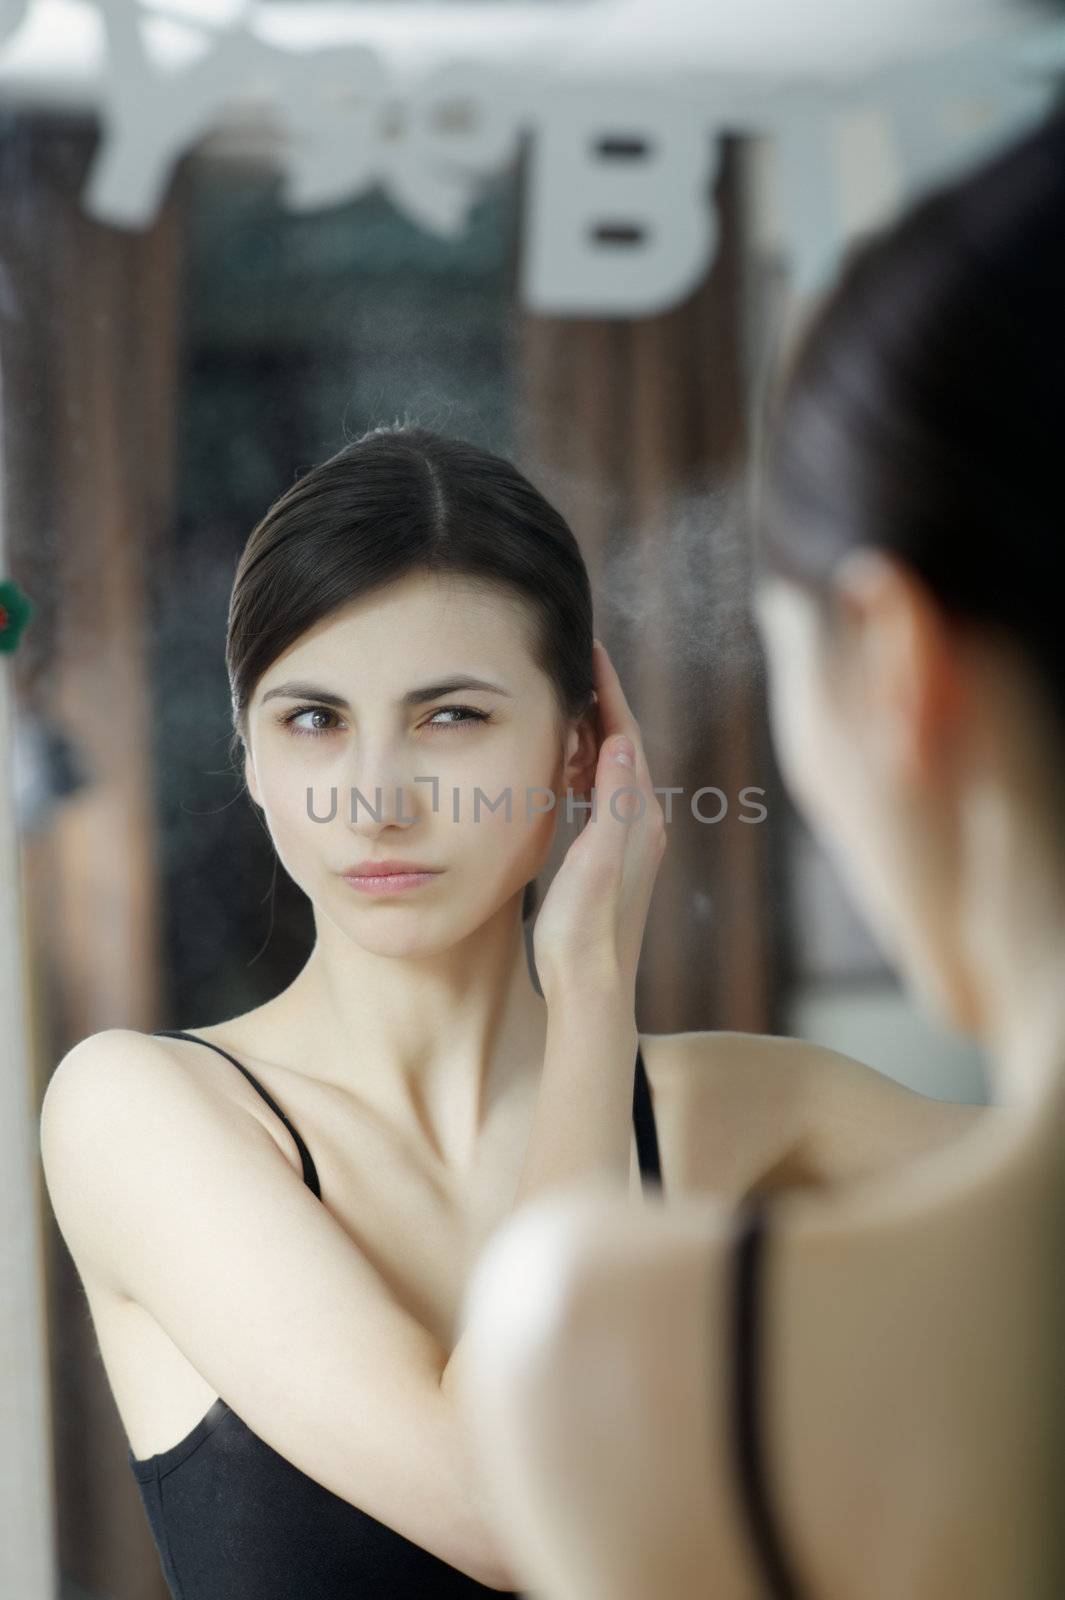 An image of a woman looking at herself in the mirror